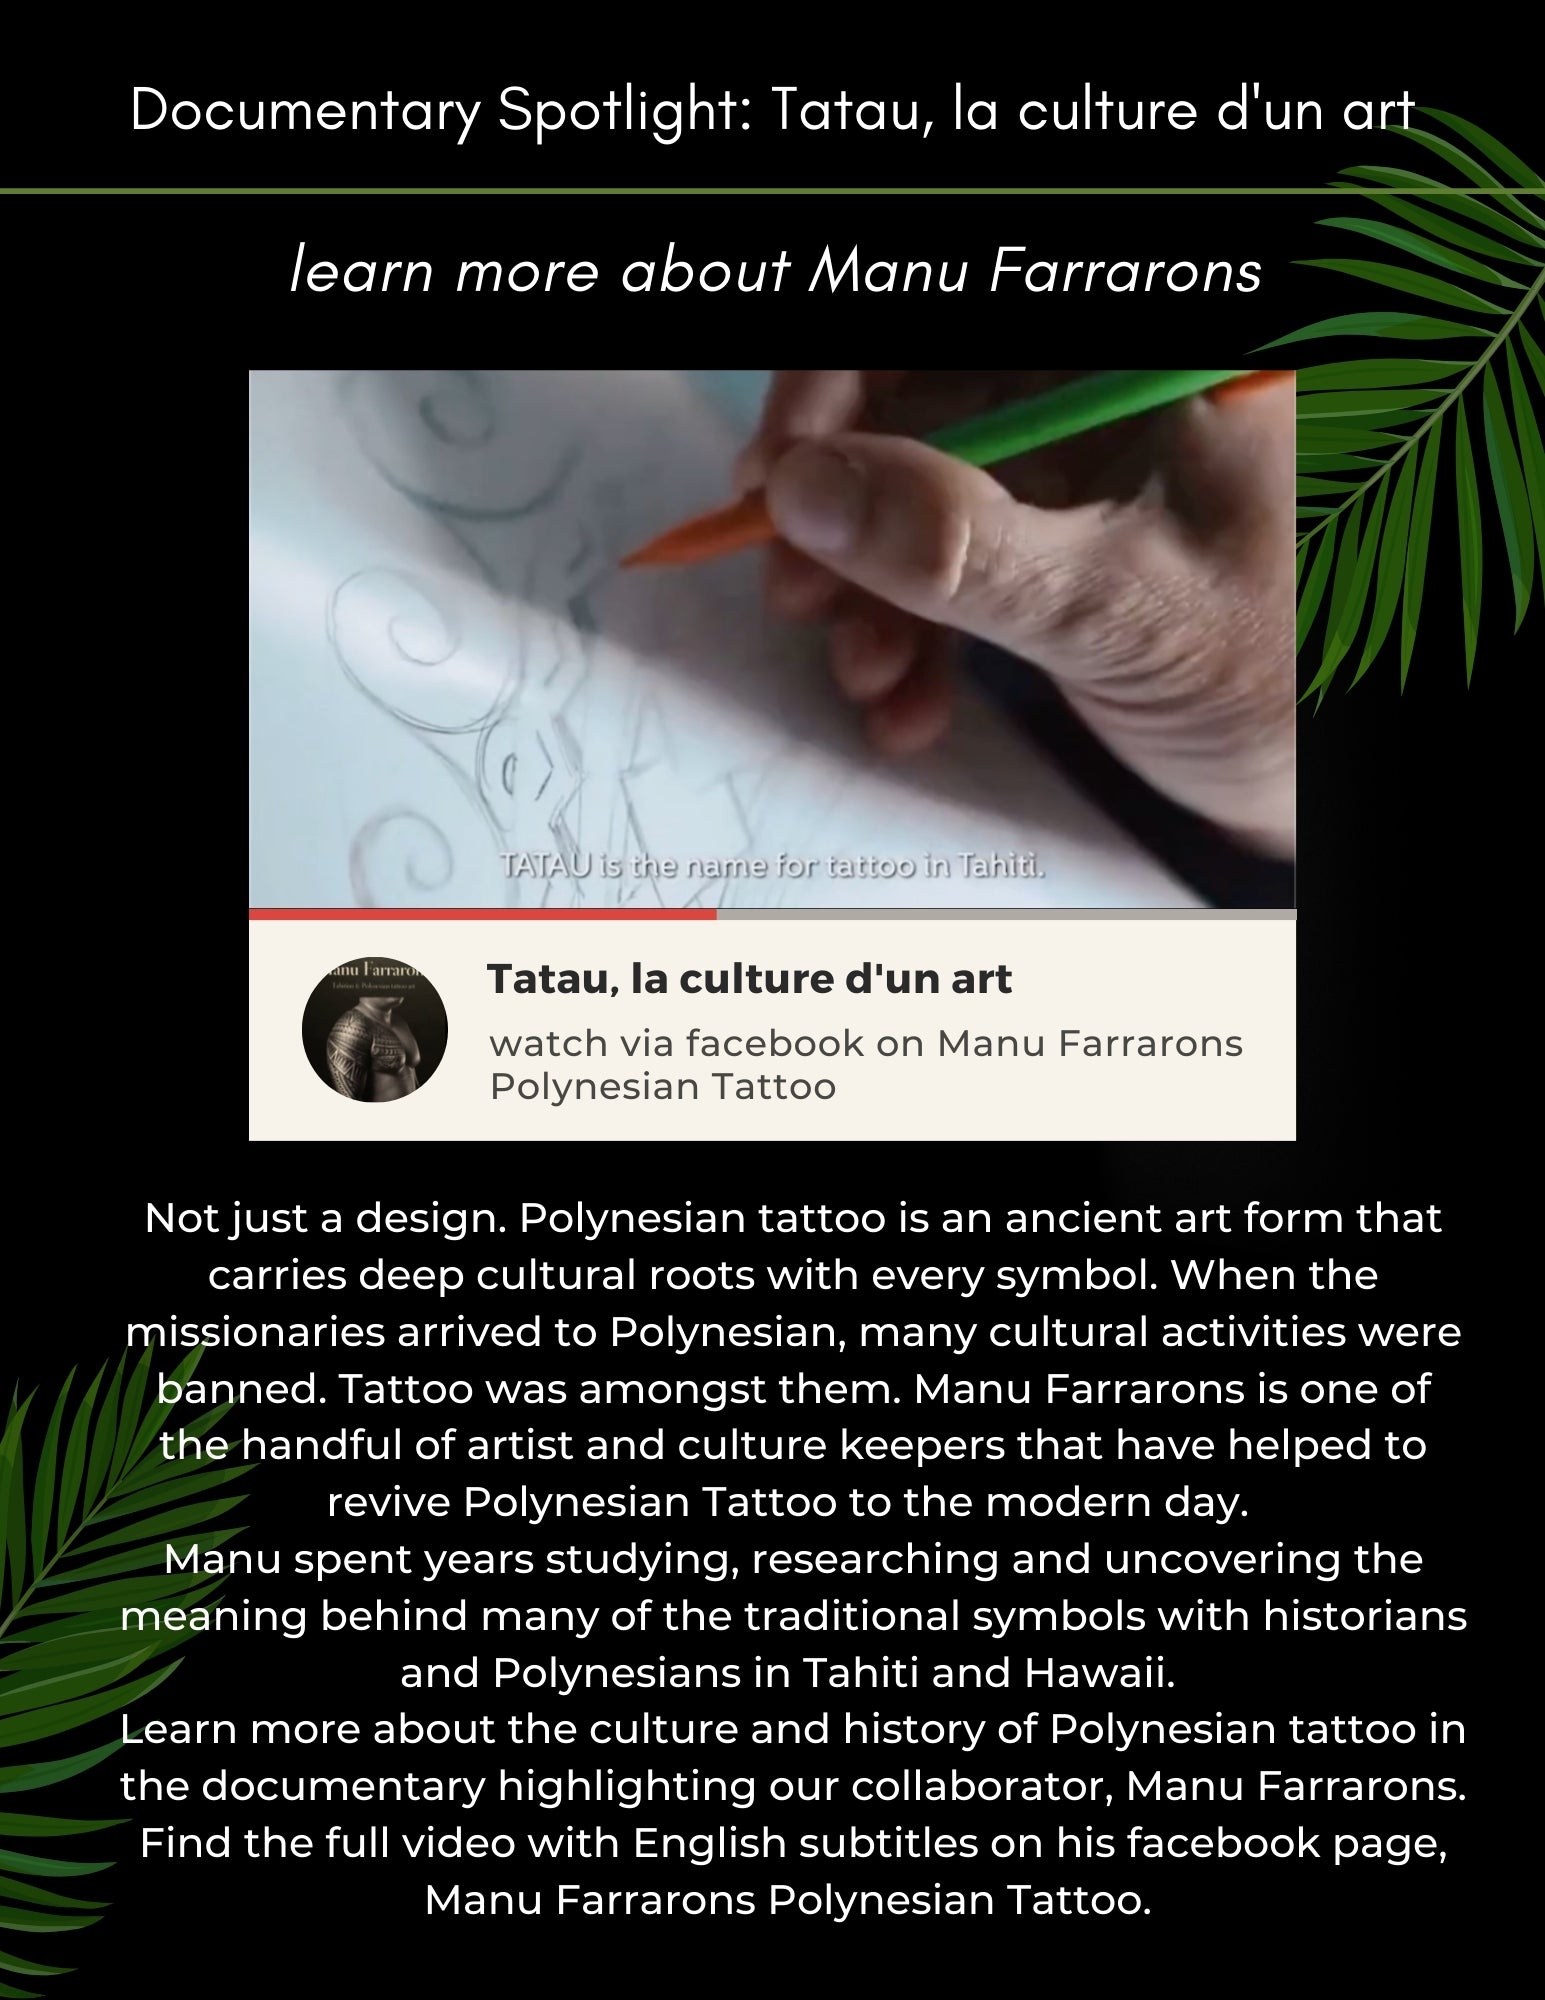 Not just a design. Polynesian tattoo is an ancient art form that carries deep cultural roots with every symbol. When the missionaries arrived to Polynesian, many cultural activities were banned. Tattoo was amongst them. Manu Farrarons is one of the handful of artist and culture keepers that have helped to revive Polynesian Tattoo to the modern day.  Manu spent years studying, researching and uncovering the meaning behind many of the traditional symbols with historians and Polynesians in Tahiti and Hawaii.  Learn more about the culture and history of Polynesian tattoo in the documentary highlighting our collaborator, Manu Farrarons. Find the full video with English subtitles on his facebook page, Manu Farrarons Polynesian Tattoo. 